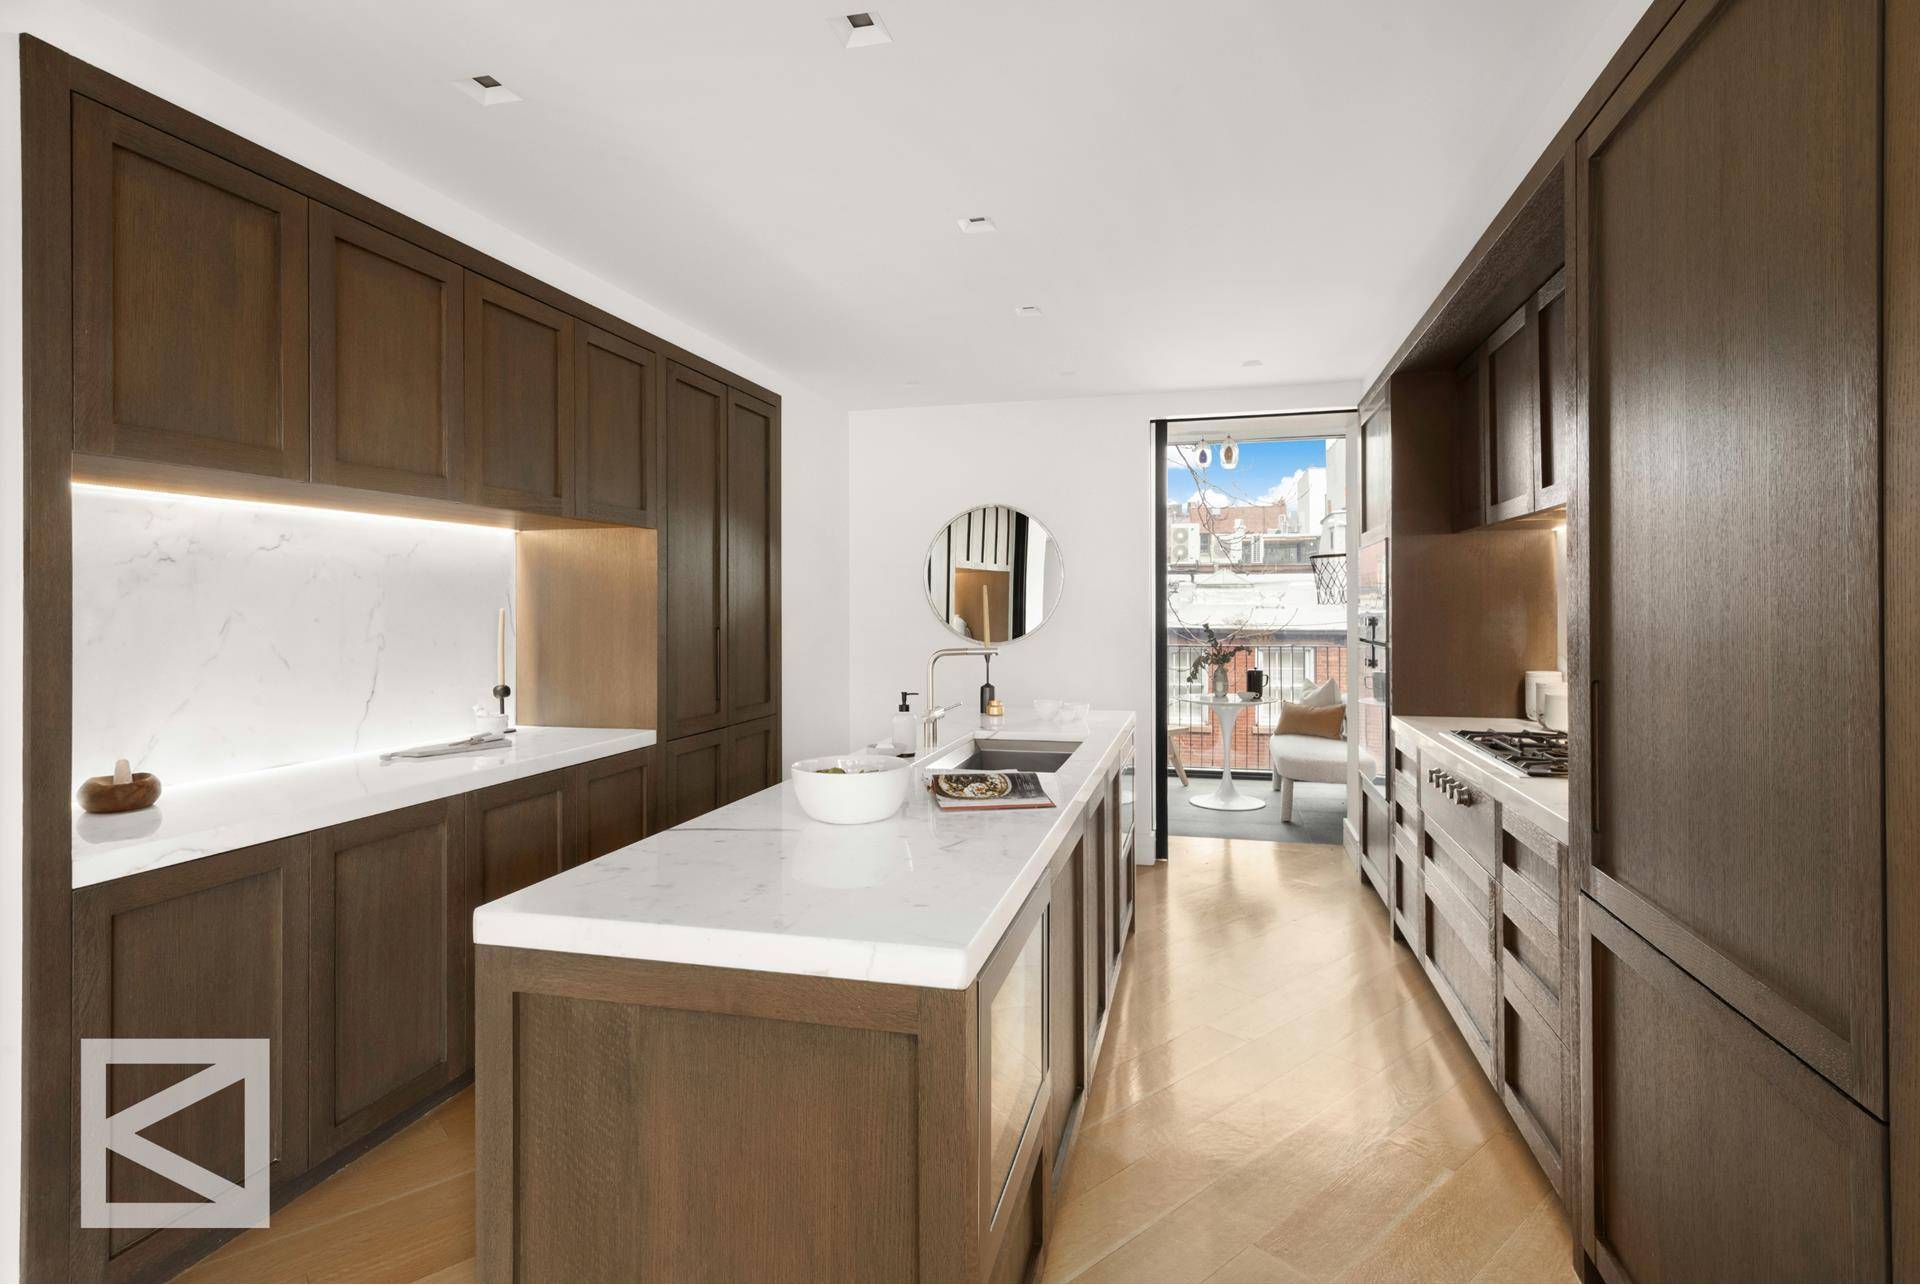 Nestled in the highly coveted West Village, situated on one of its most desirable corners, this sophisticated loft offers a truly elevated living experience.